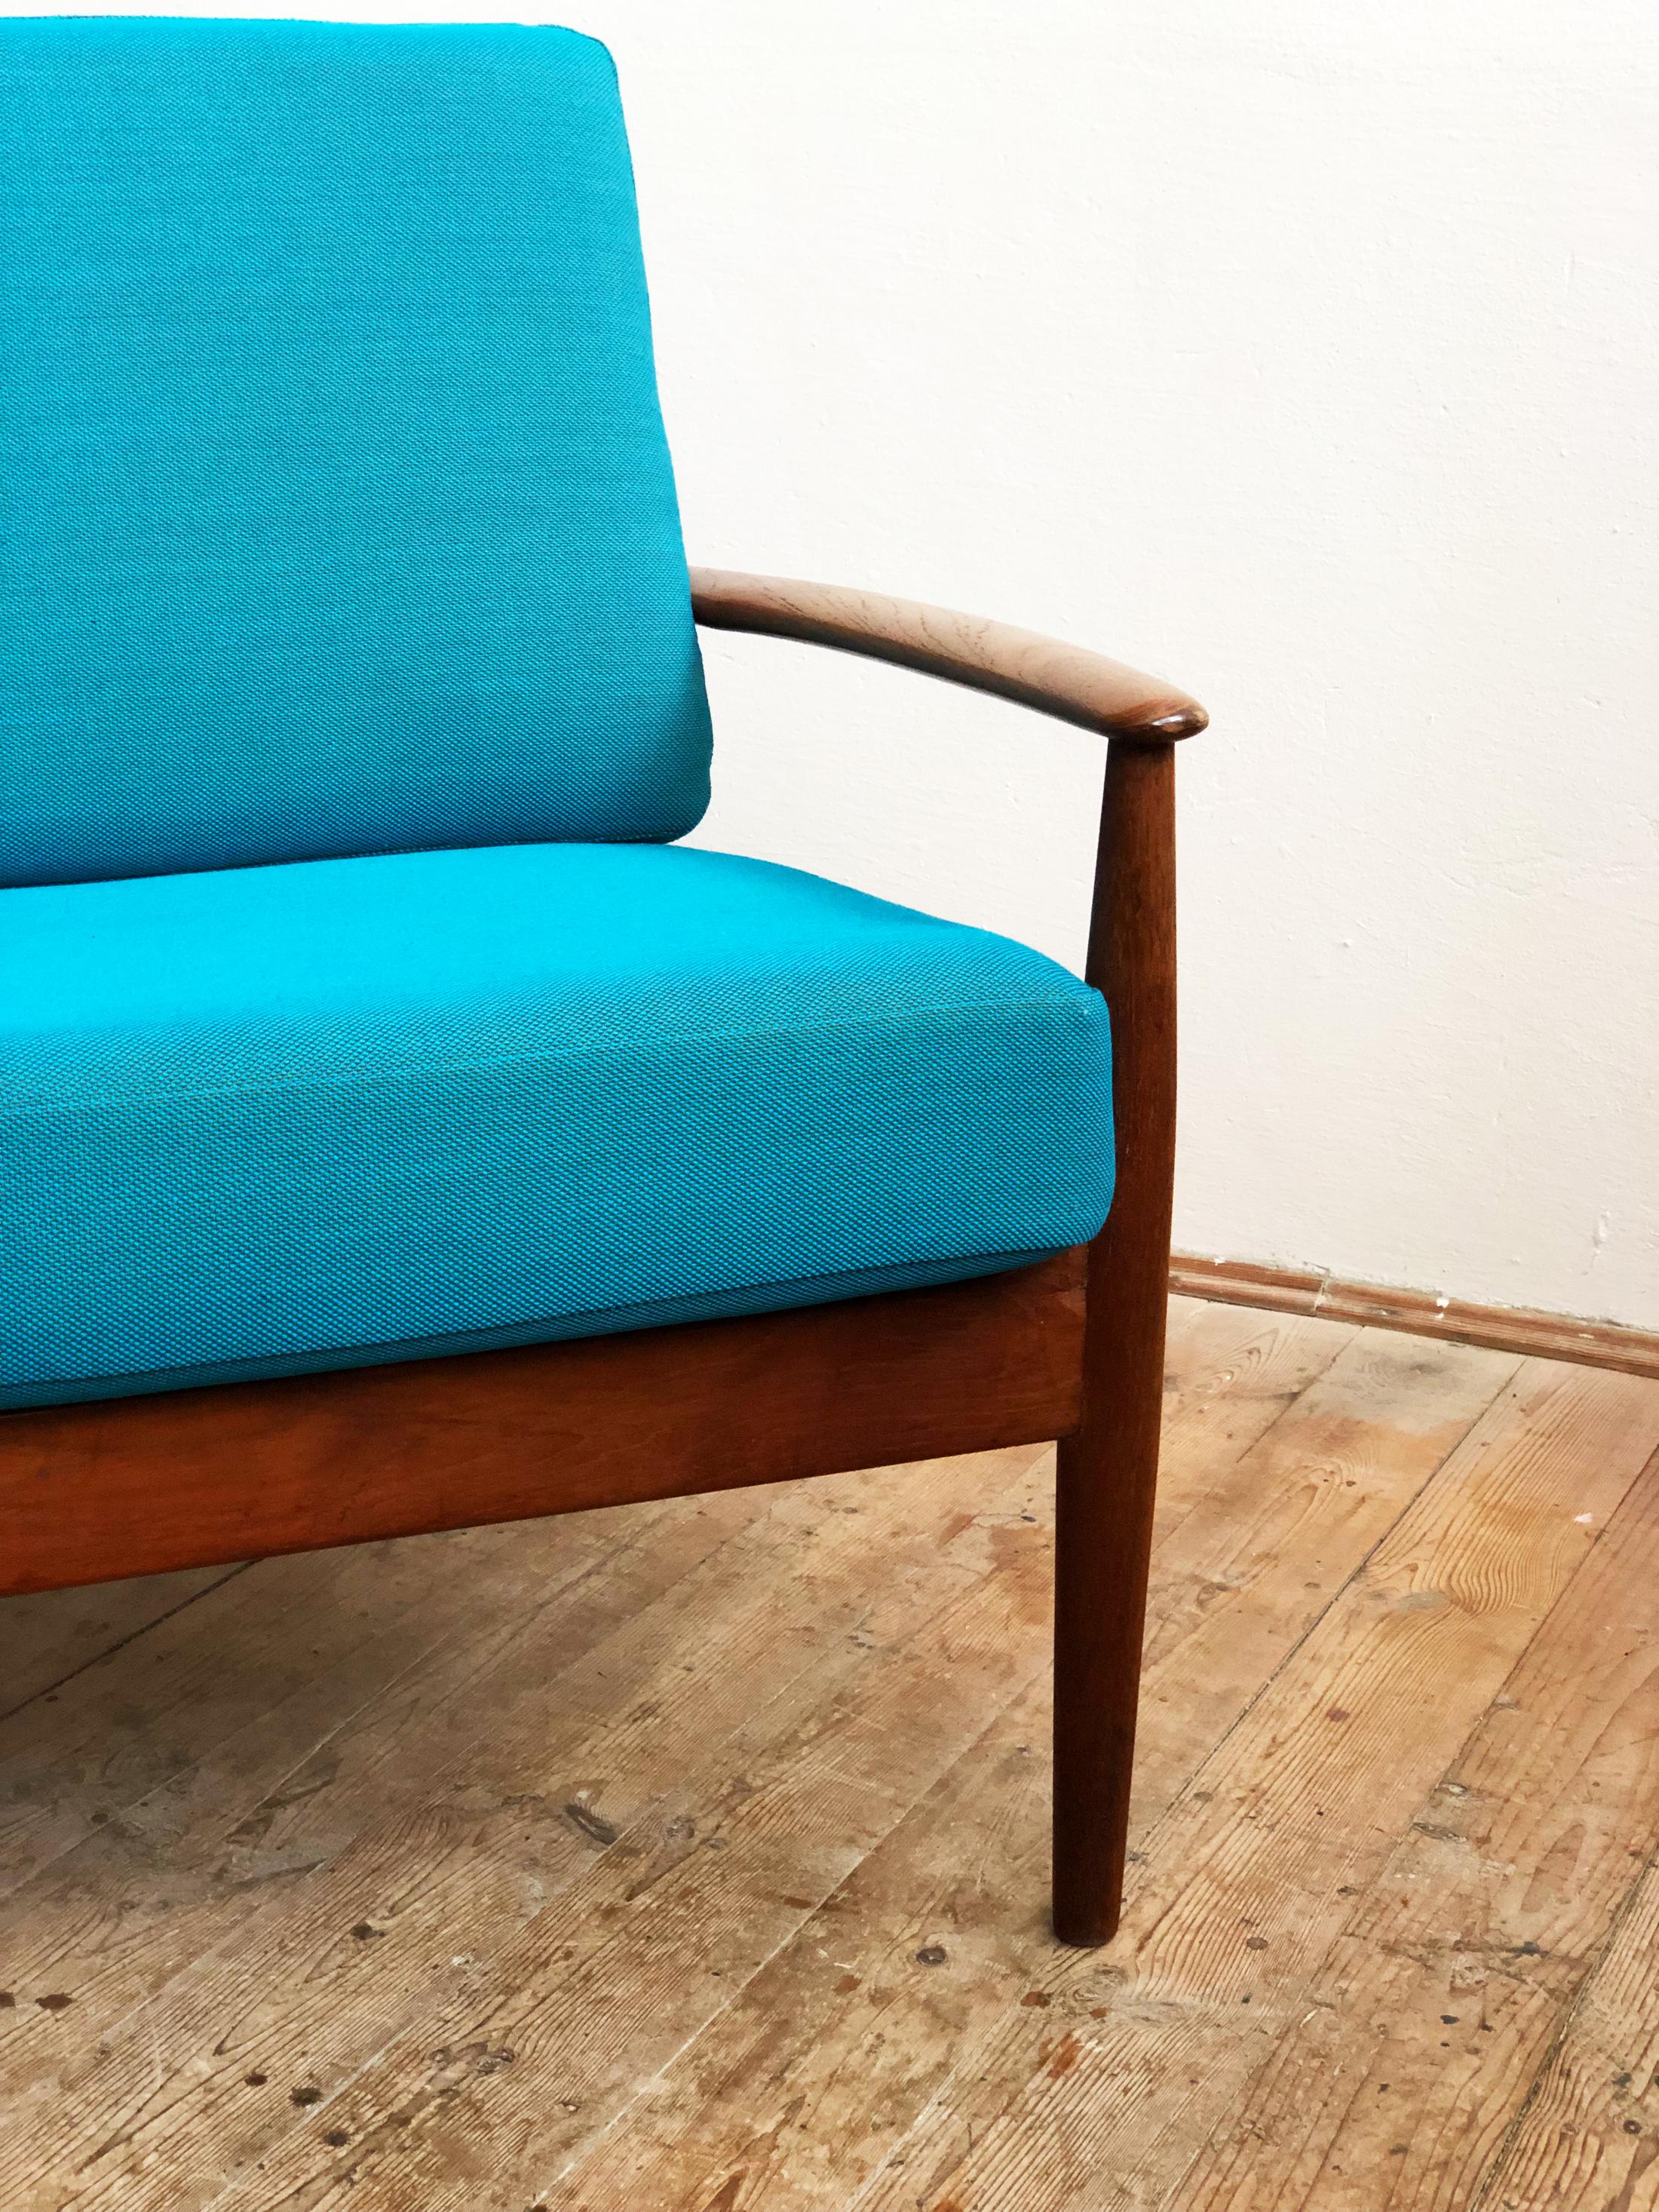 Midcentury Teak Sofa with Turquoise Upholstery by Grete Jalk for France & Son  For Sale 2